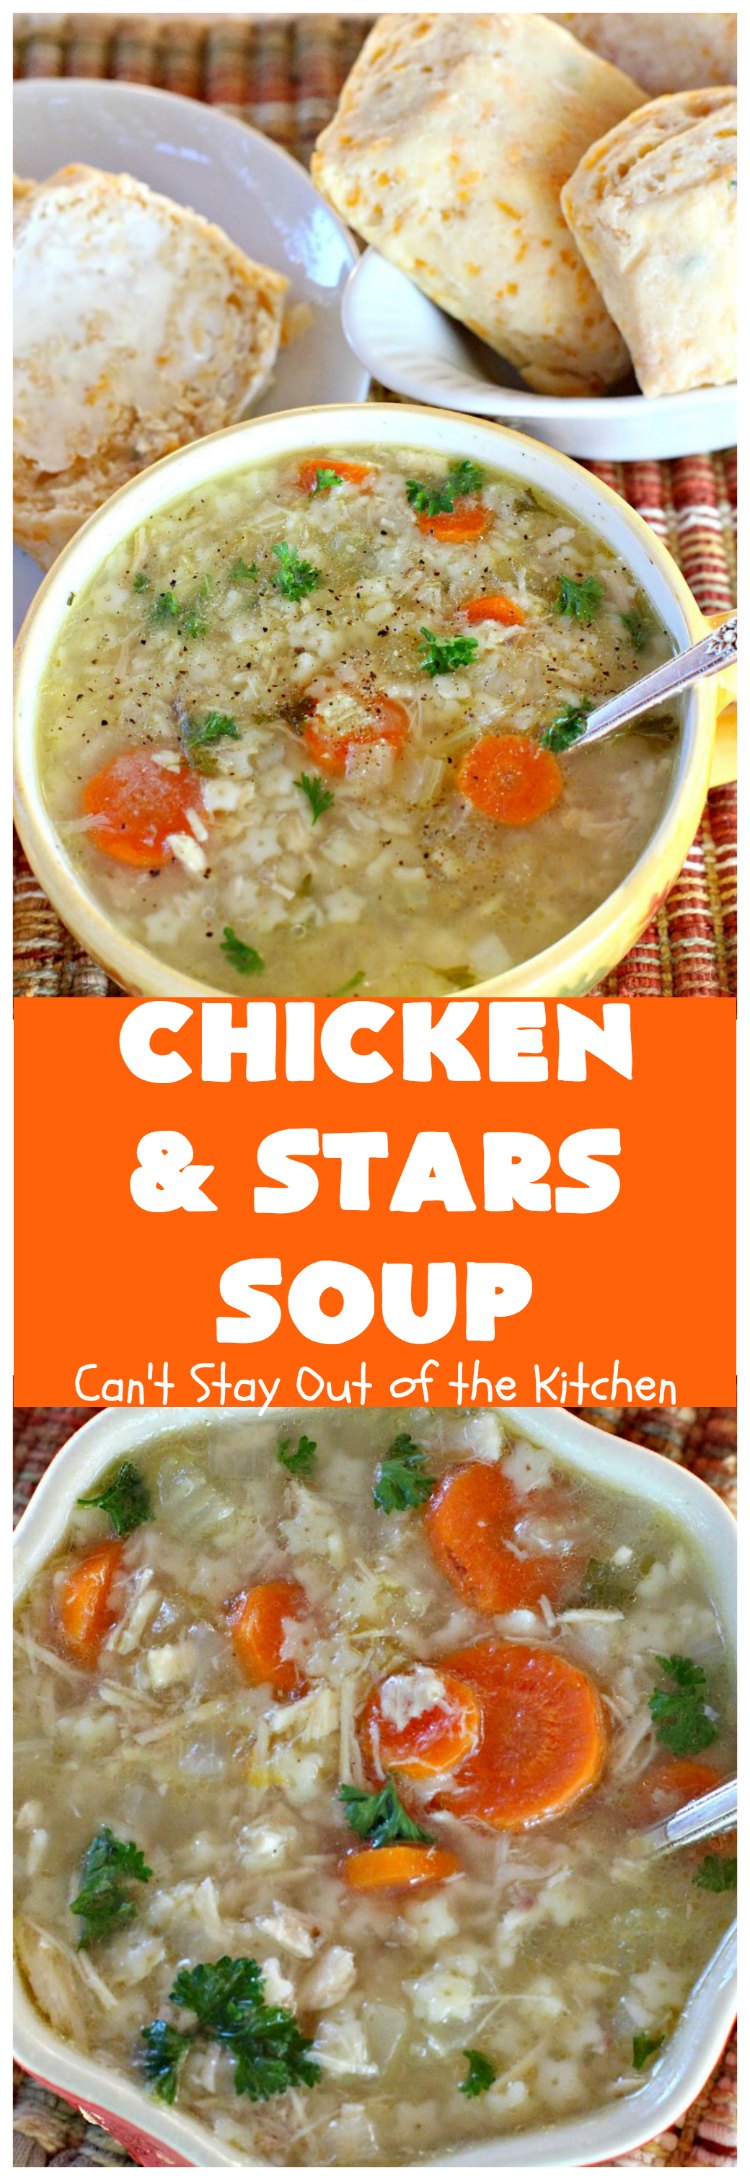 Chicken and Stars Soup | Can't Stay Out of the Kitchen